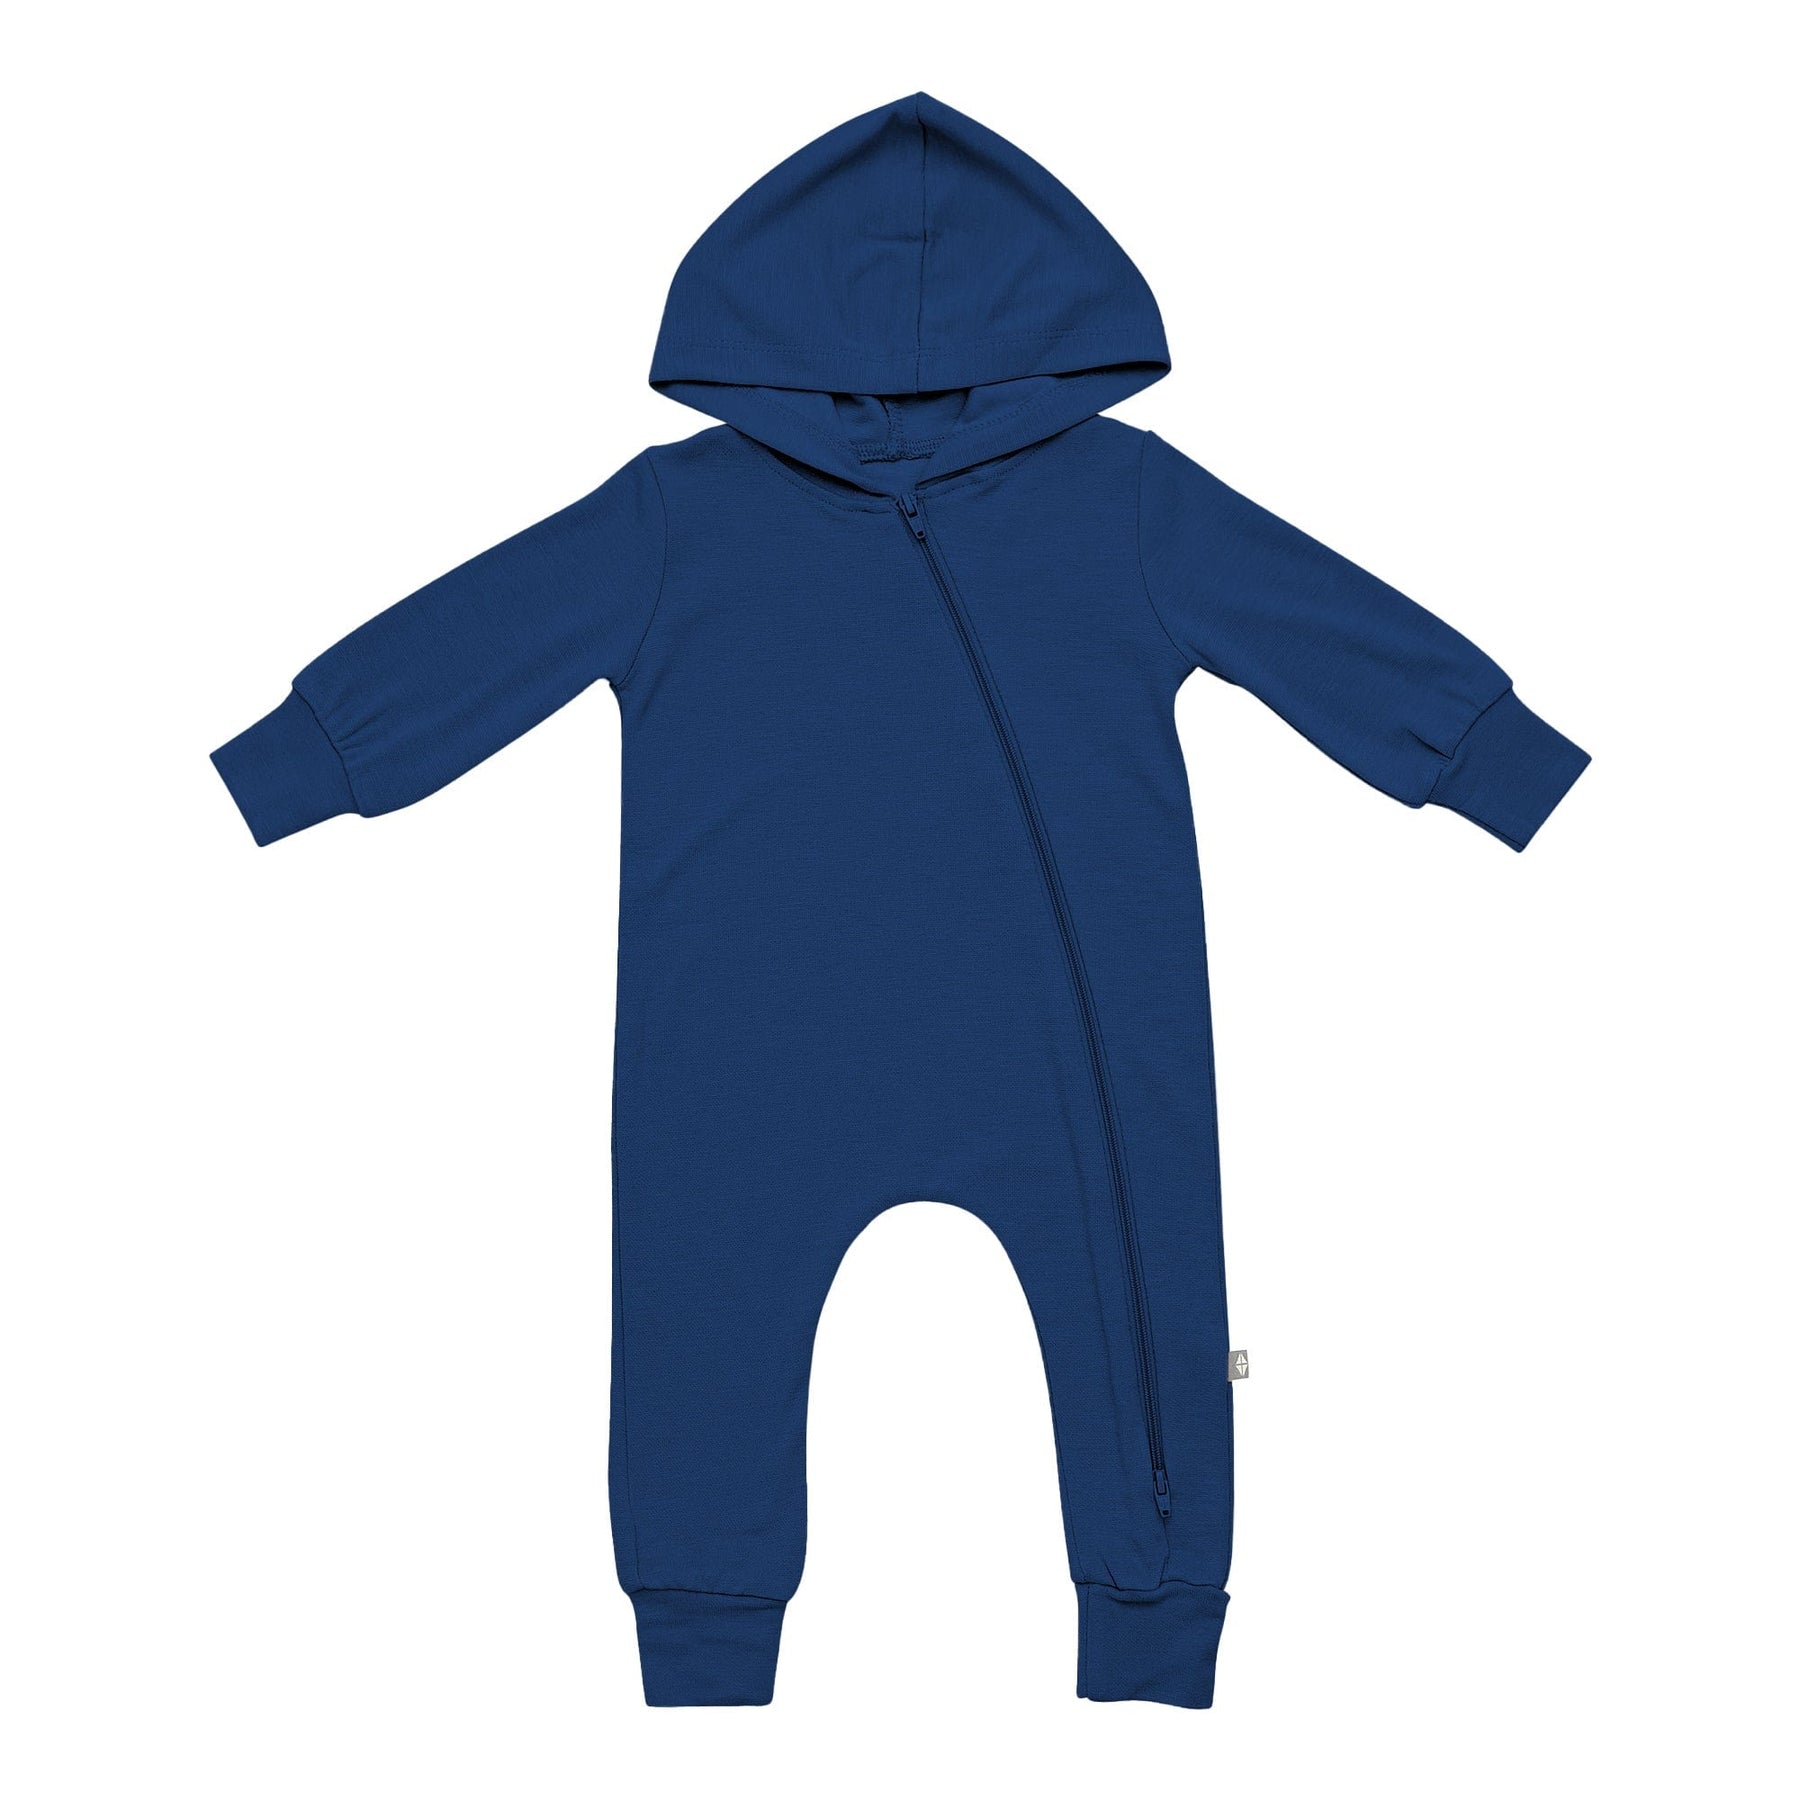 Kyte BABY Hooded Zippered Romper Bamboo Jersey Hooded Zippered Romper in Tahoe